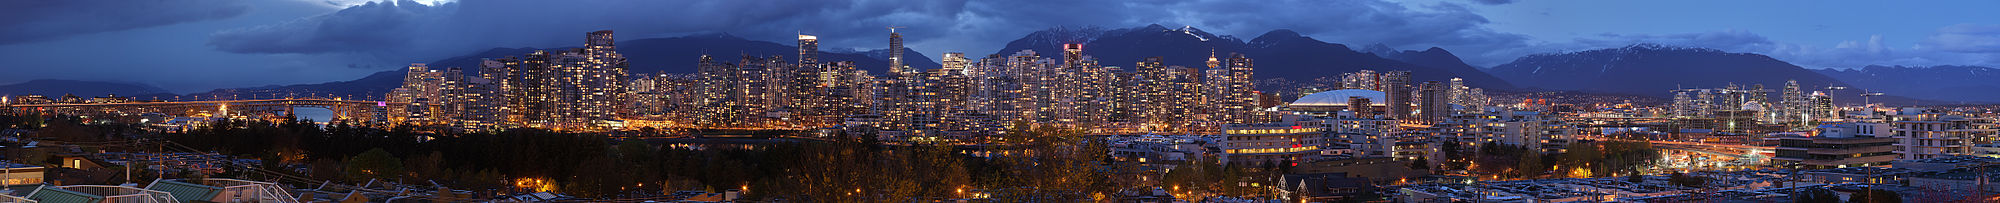 High-resolution panorama of a large, brightly-lit skyline at night. A mountain range lies in the background, and a bridge is visible on the left-hand side of the panorama.